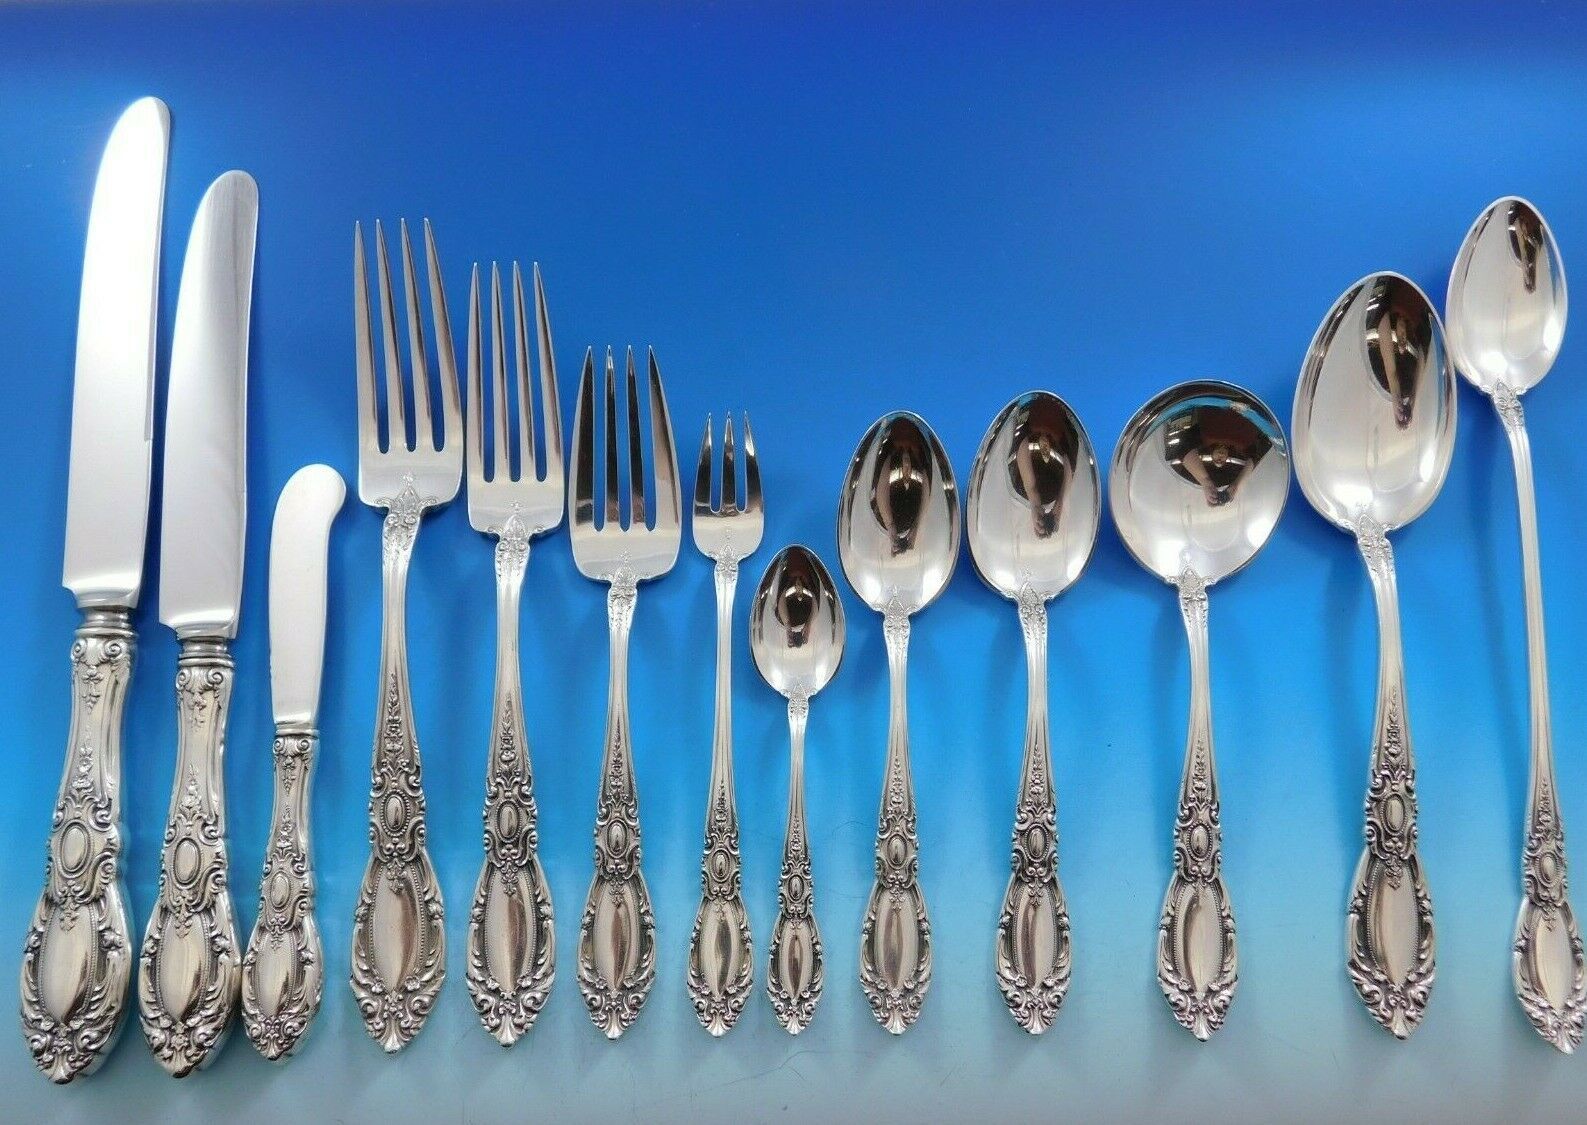 Primary image for King Richard by Towle Sterling Silver Flatware Set for 12 Service Dinner 179 pcs